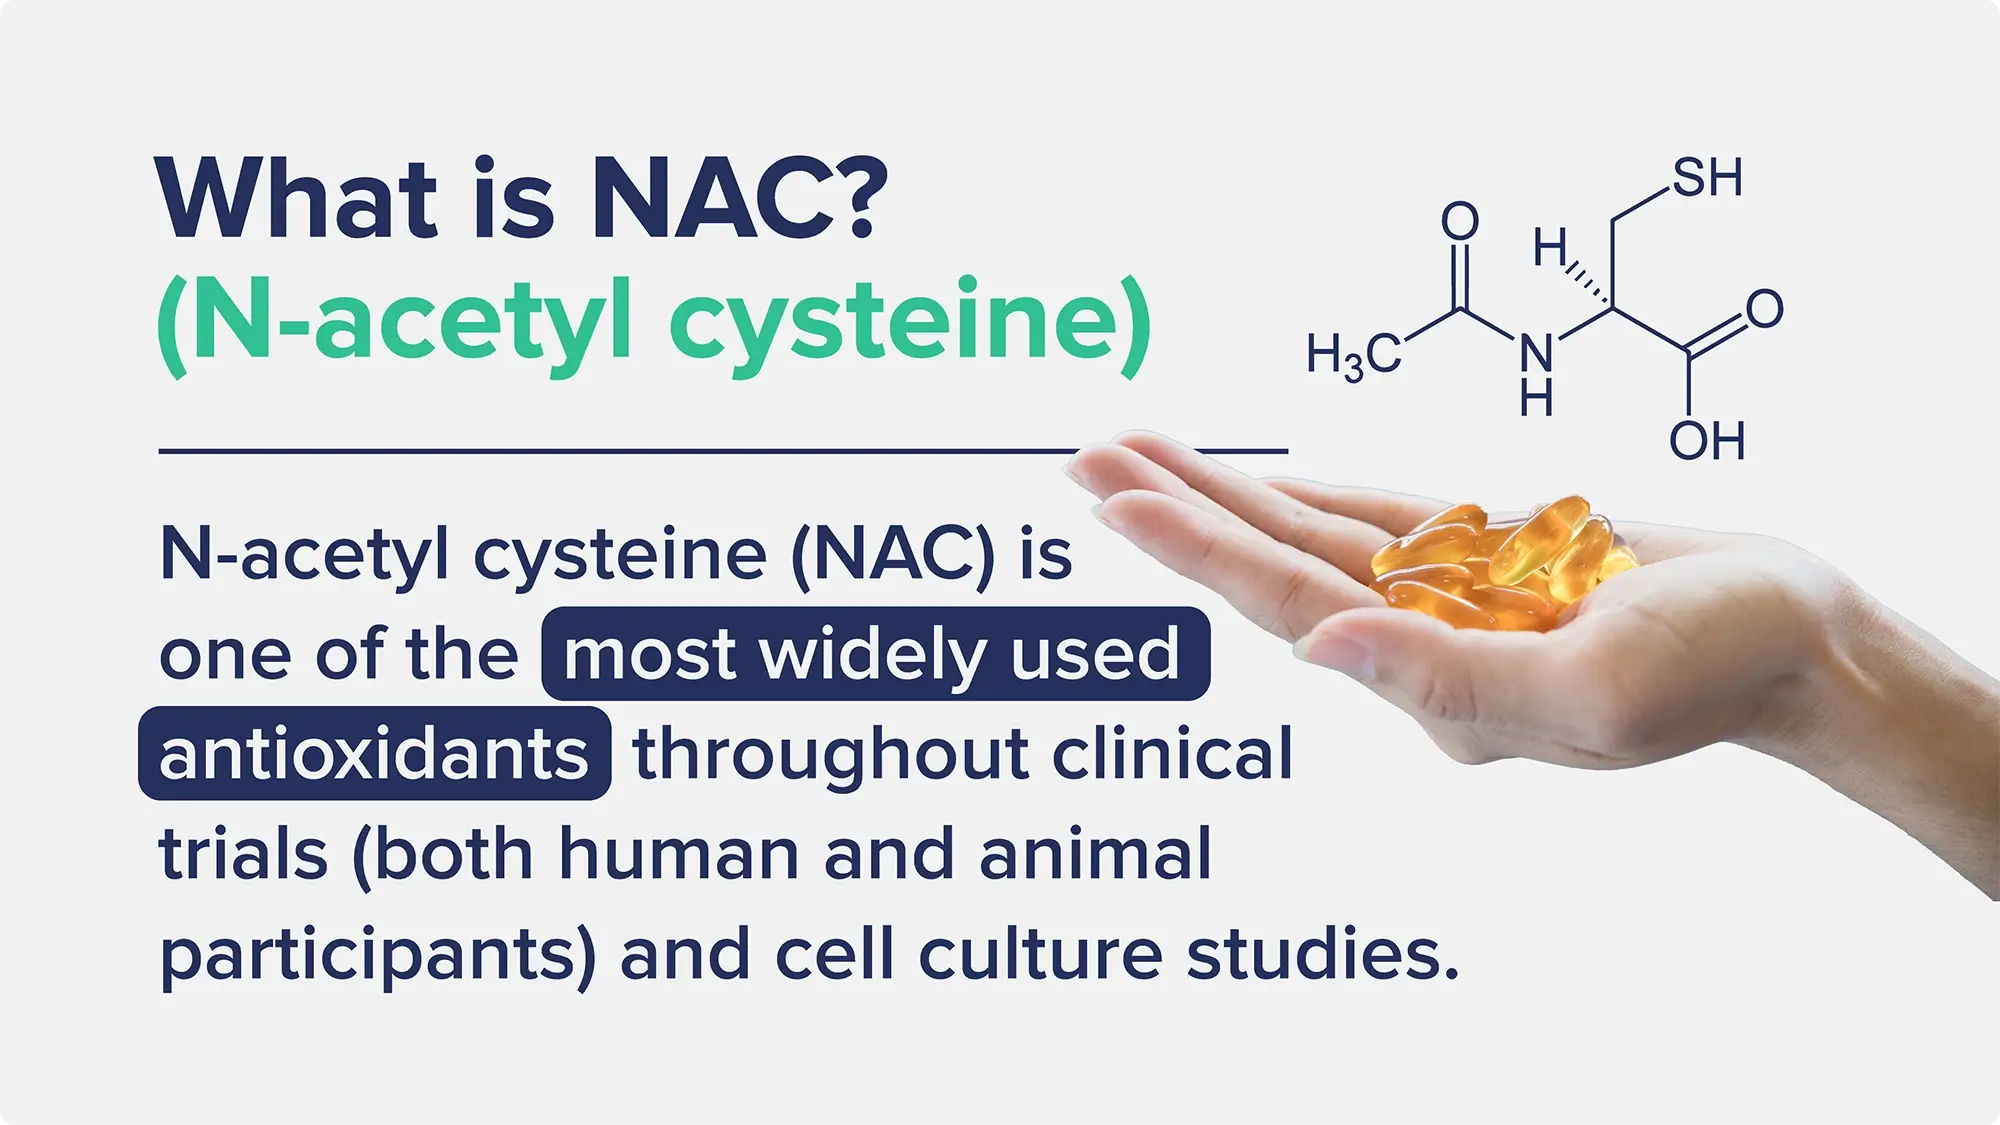 A graphic entitled "What is NAC?" including a diagram of the chemical formula and information about it being a widely used antioxidant in studies.